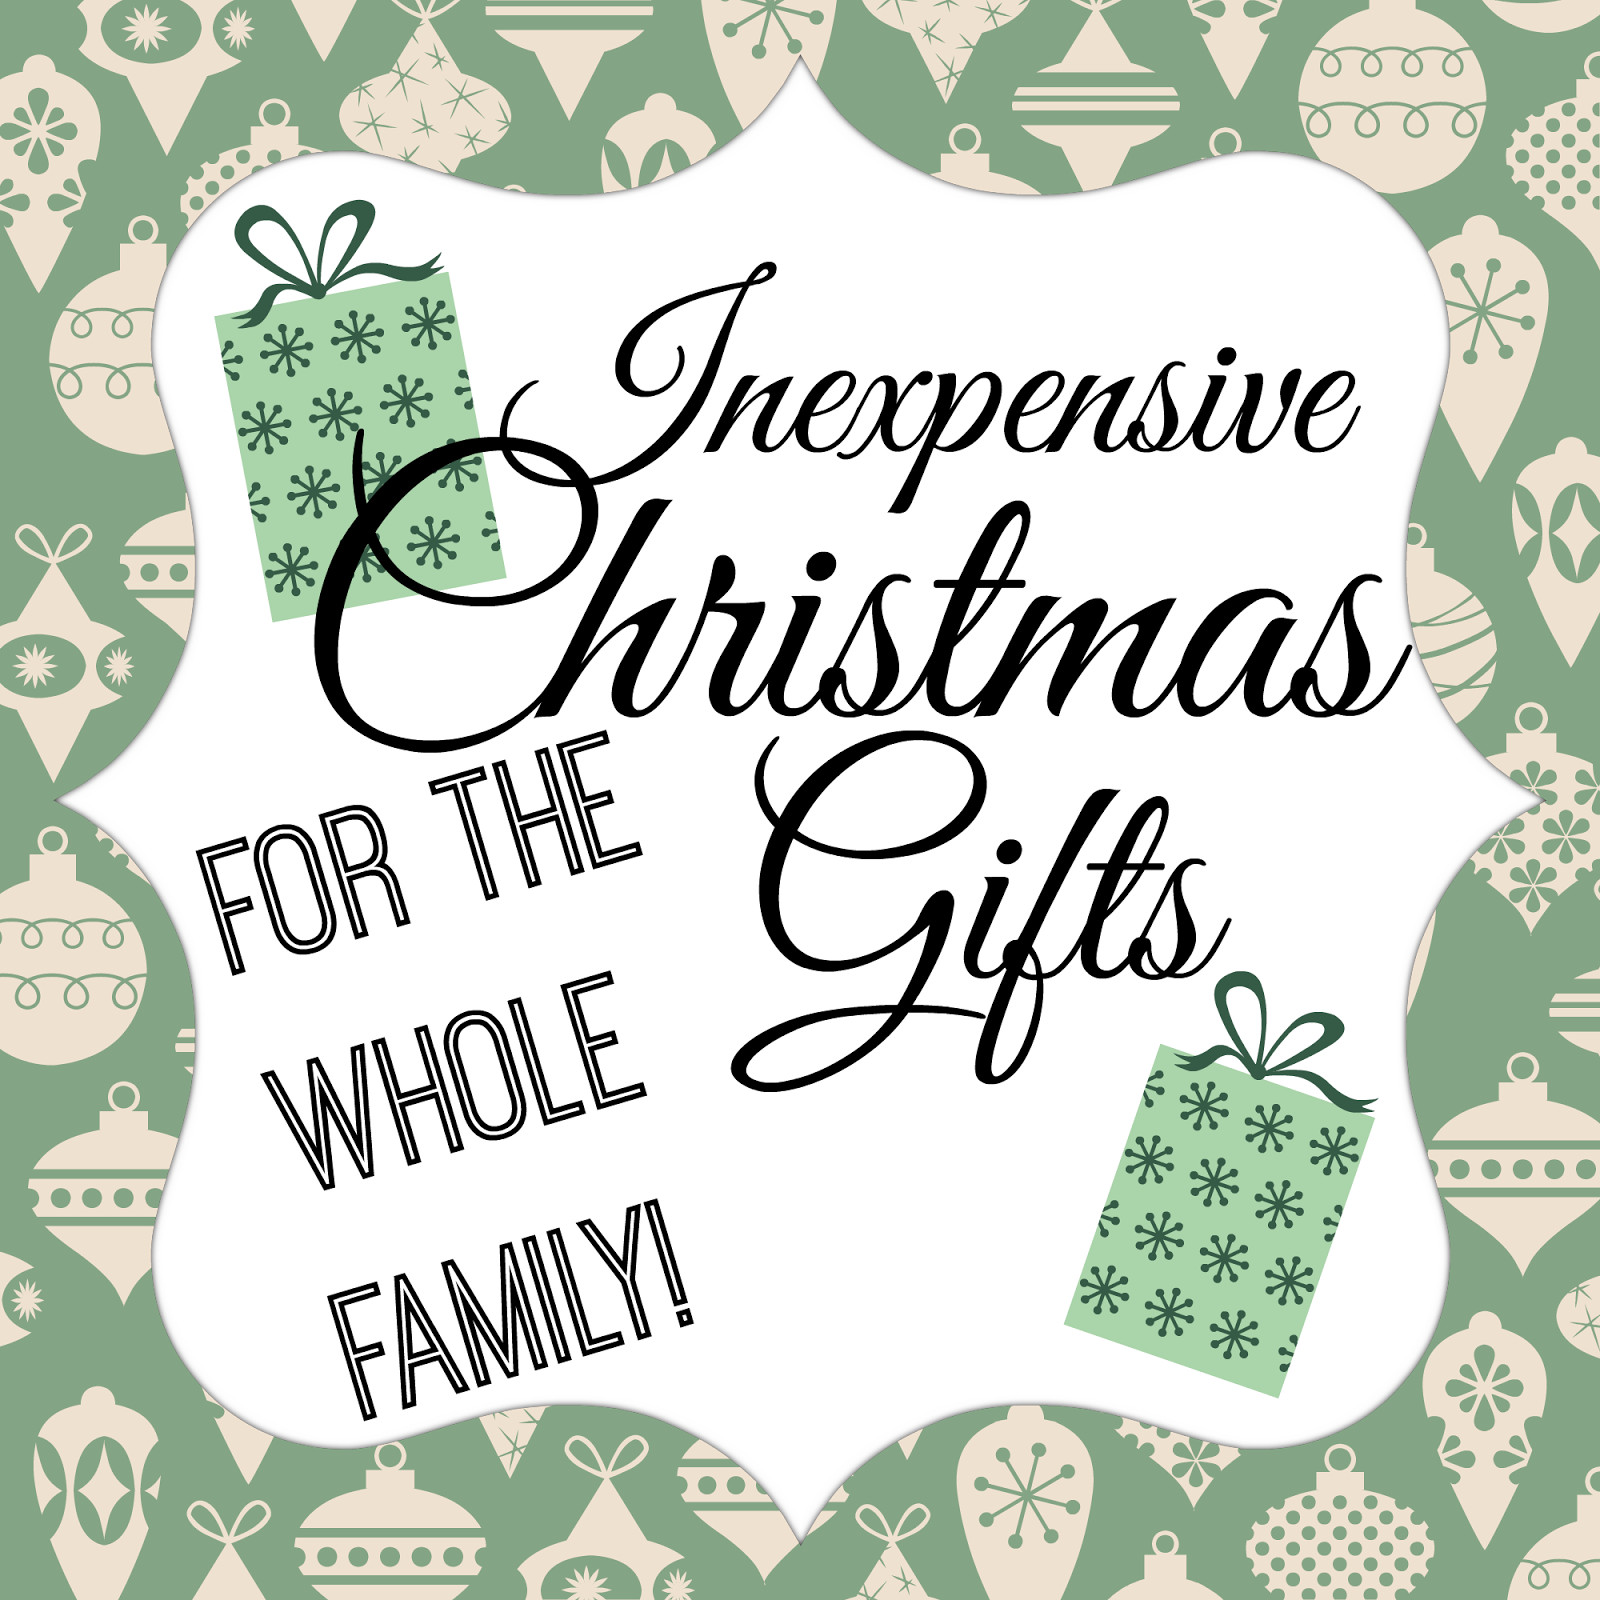 Christmas Gift Ideas For The Whole Family
 Orchard Girls Inexpensive Christmas Gifts For the Whole